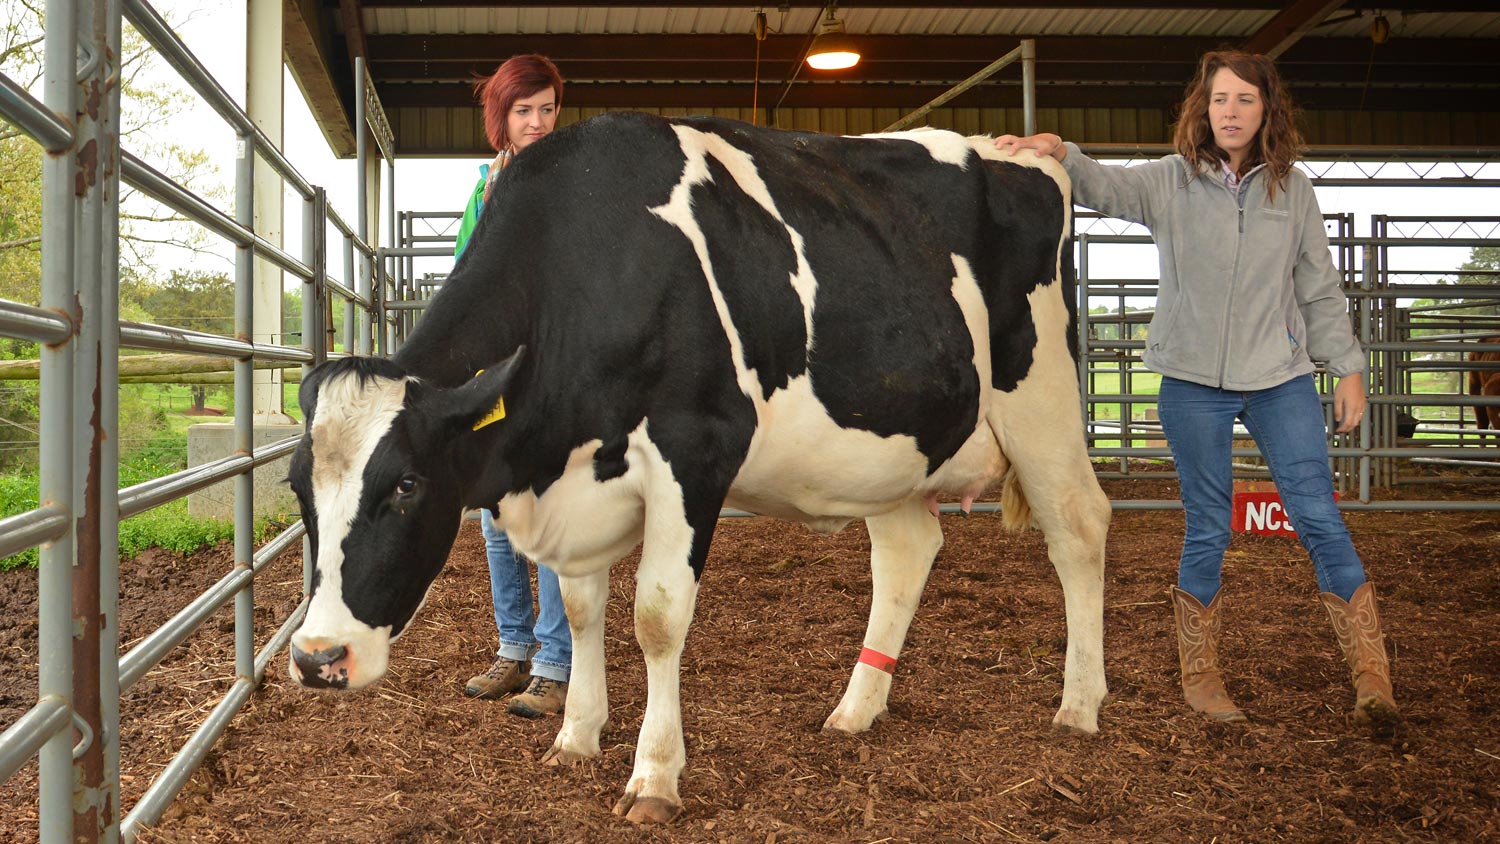 NC State students care for a cow at a university facility.